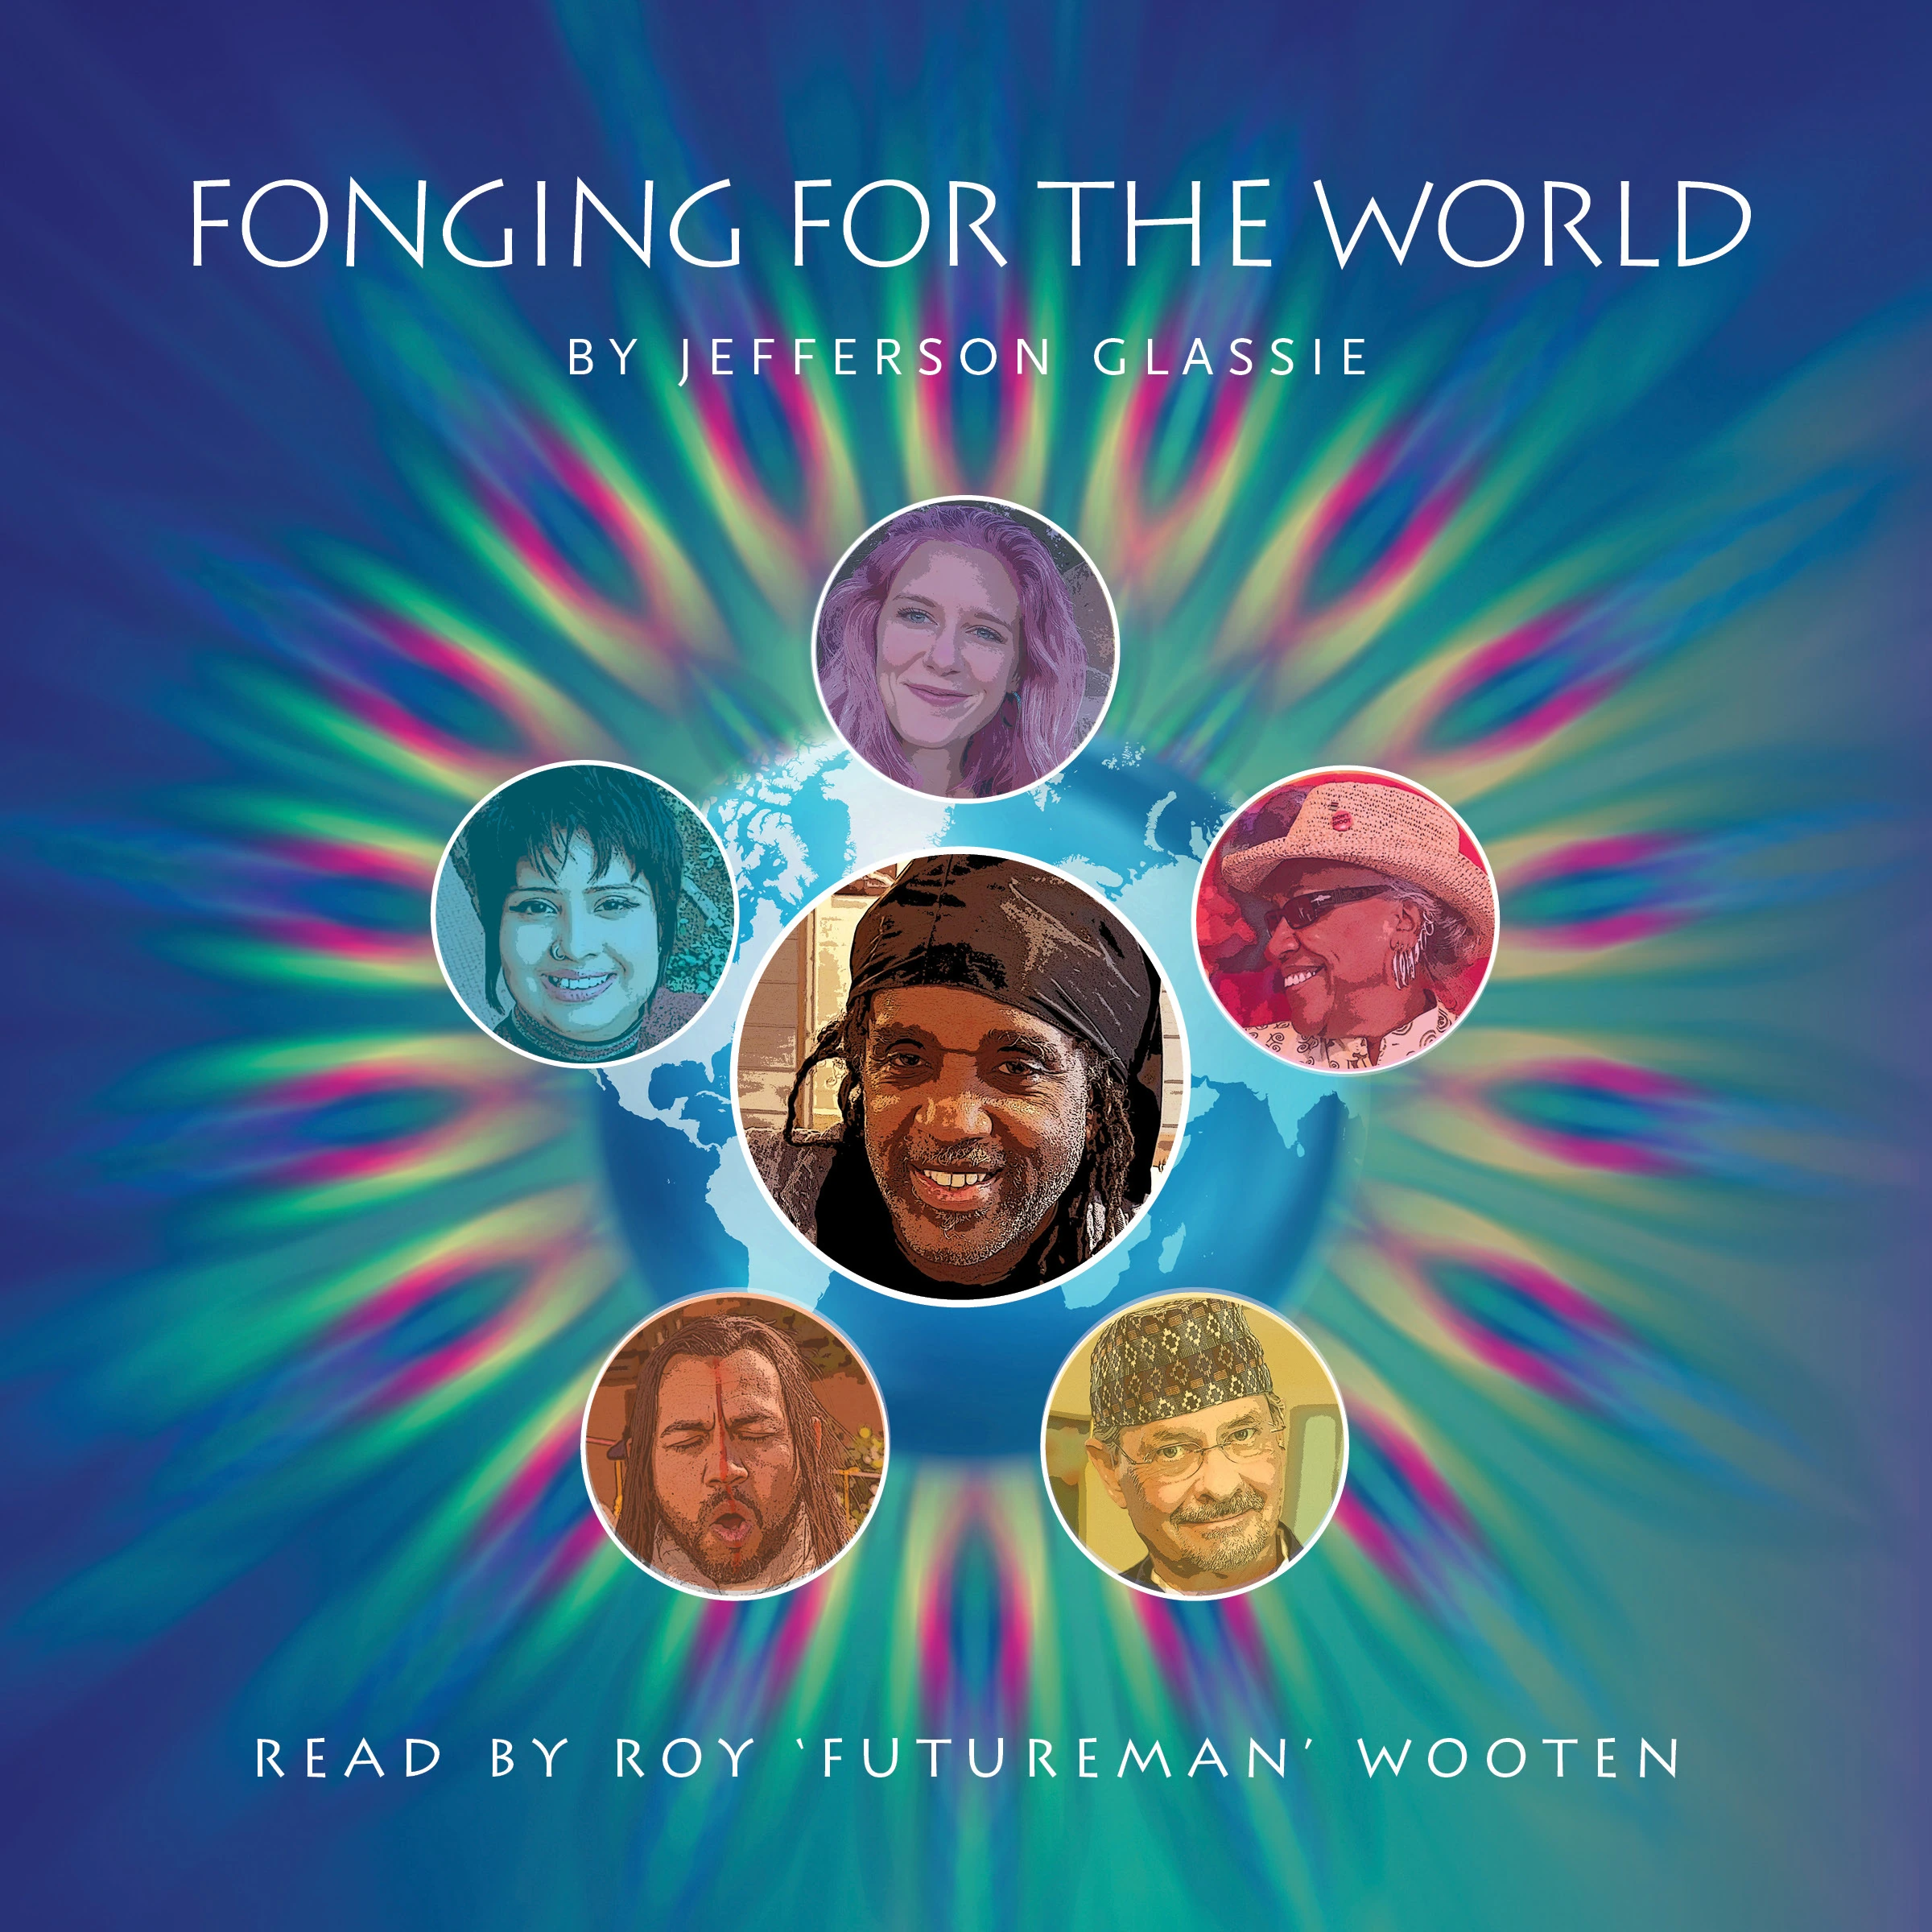 Fonging for the World by Jefferson Glassie Audiobook